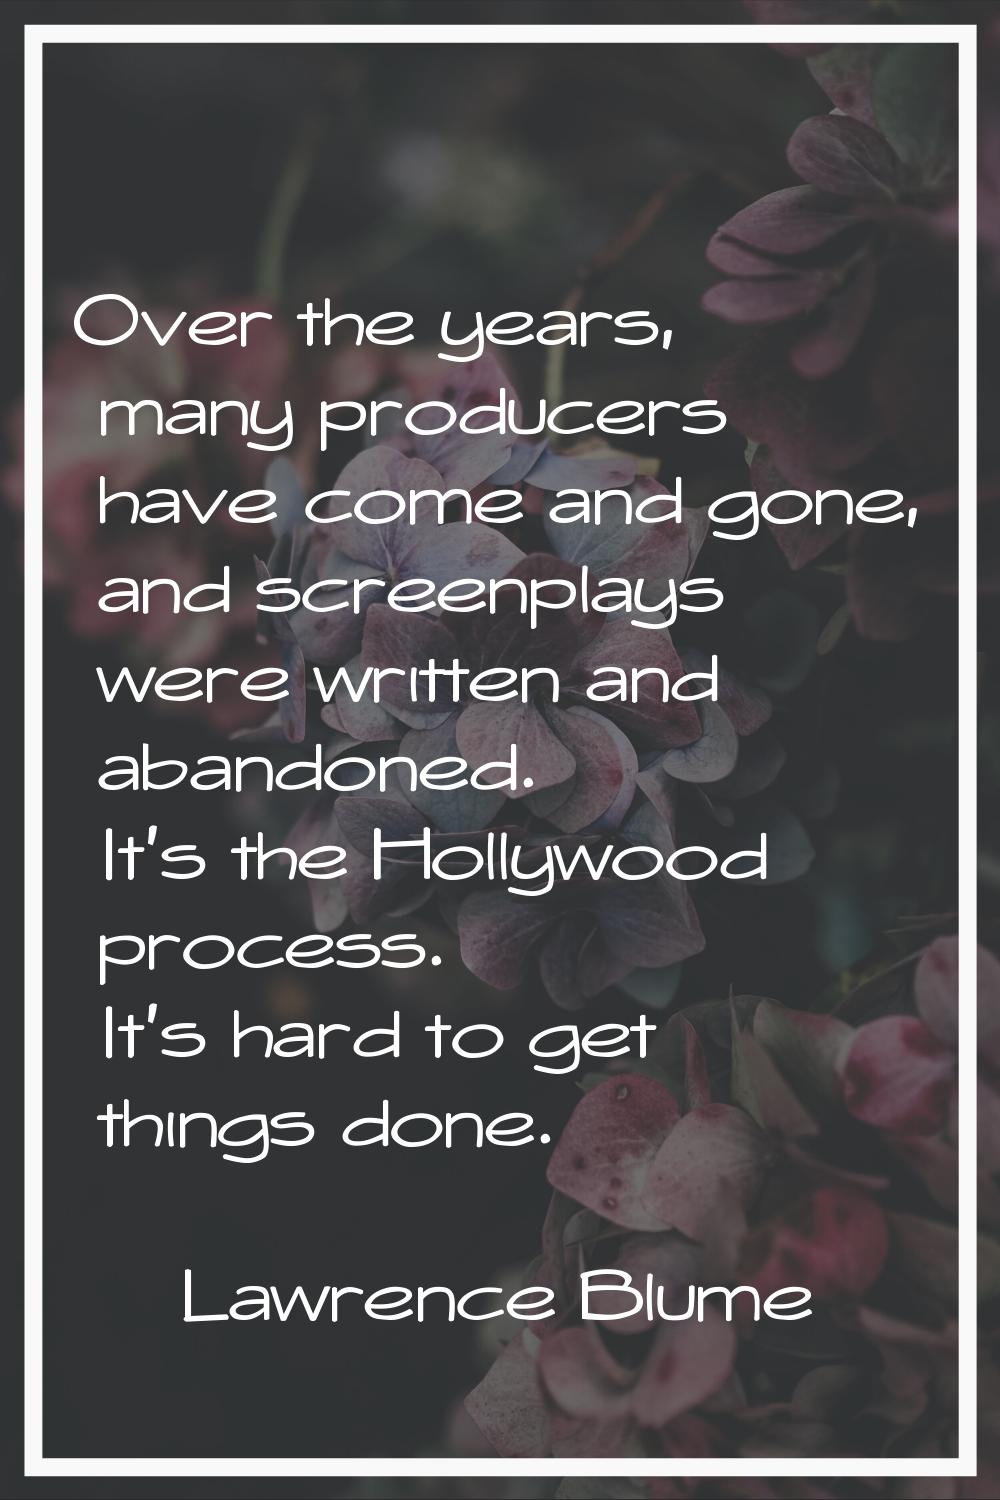 Over the years, many producers have come and gone, and screenplays were written and abandoned. It's